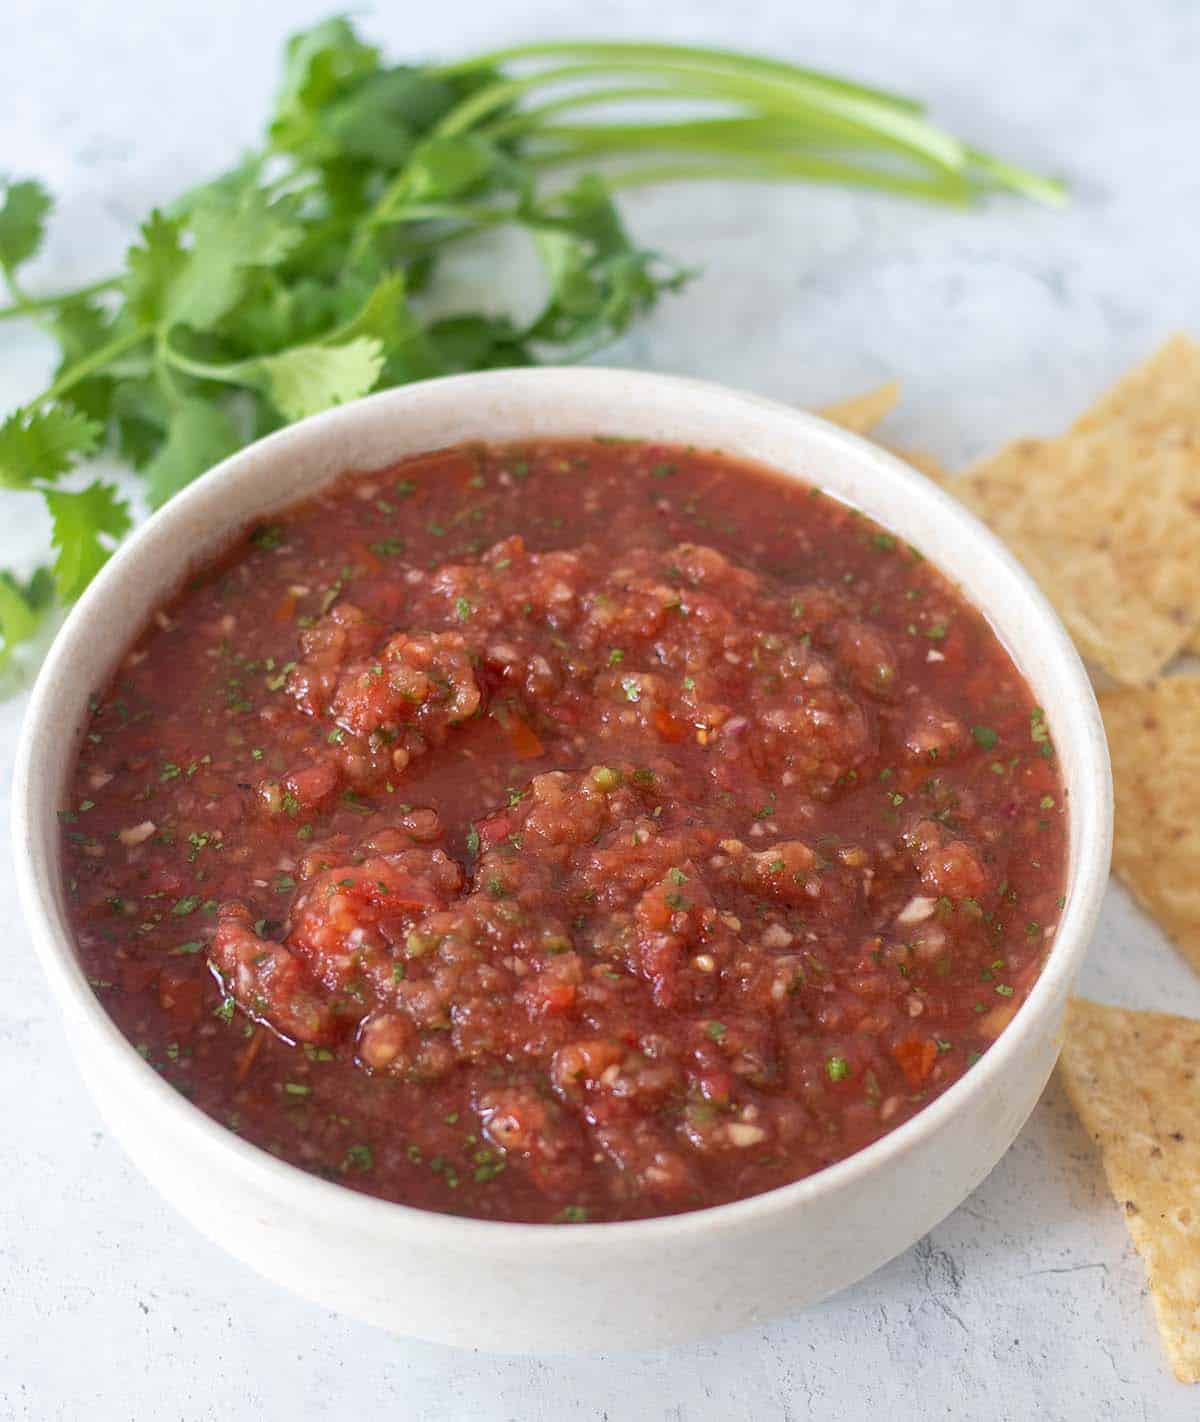 Homemade salsa in a white bowl with cilantro and tortilla chips in the background.